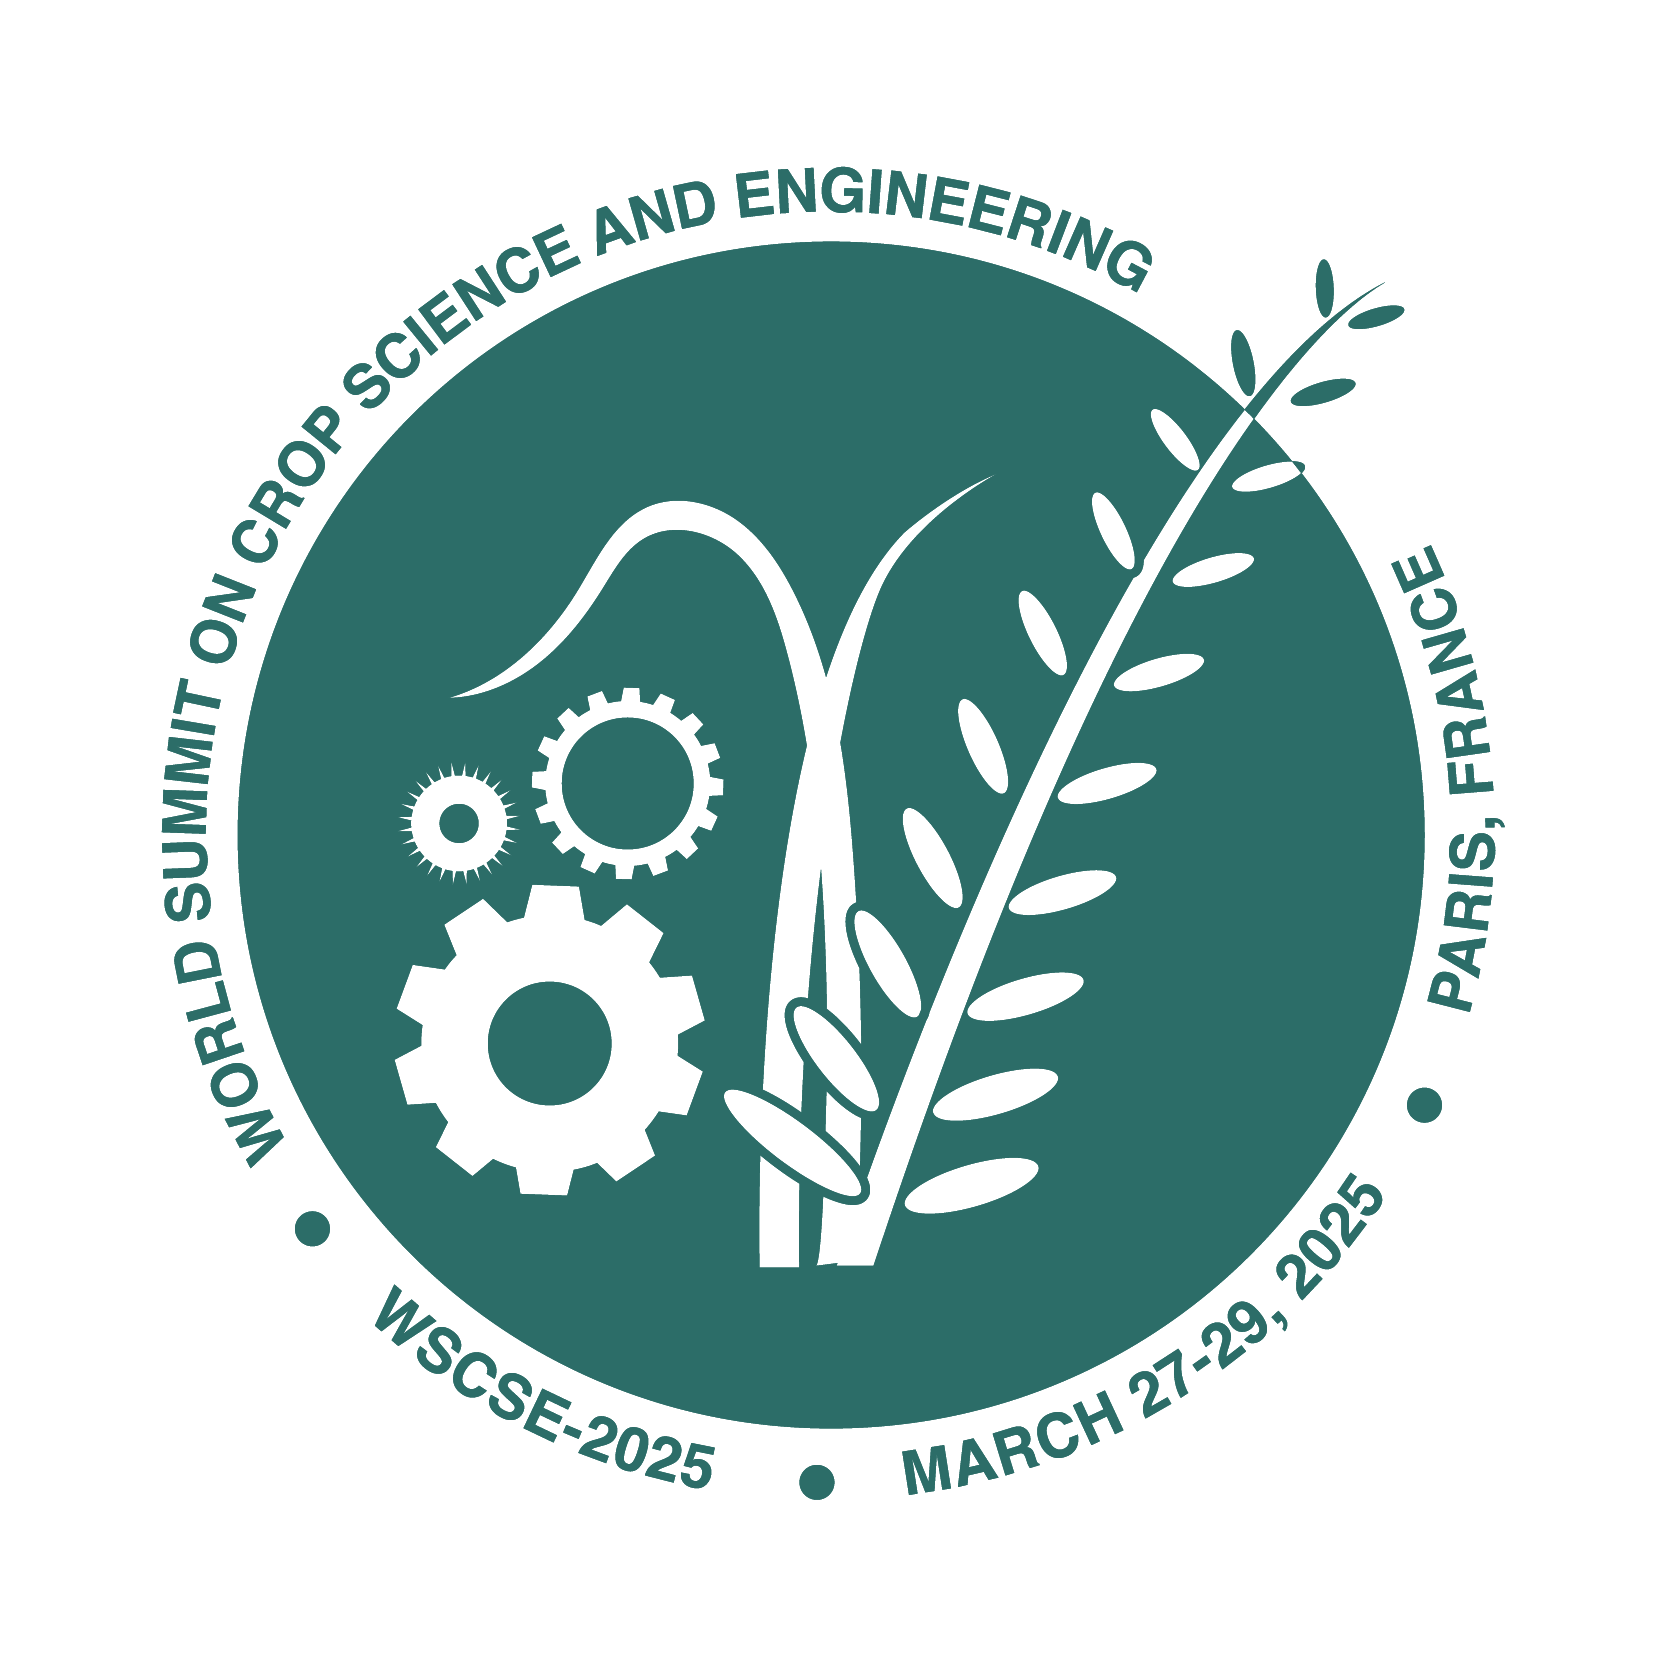 World Summit on Crop Science and Engineering